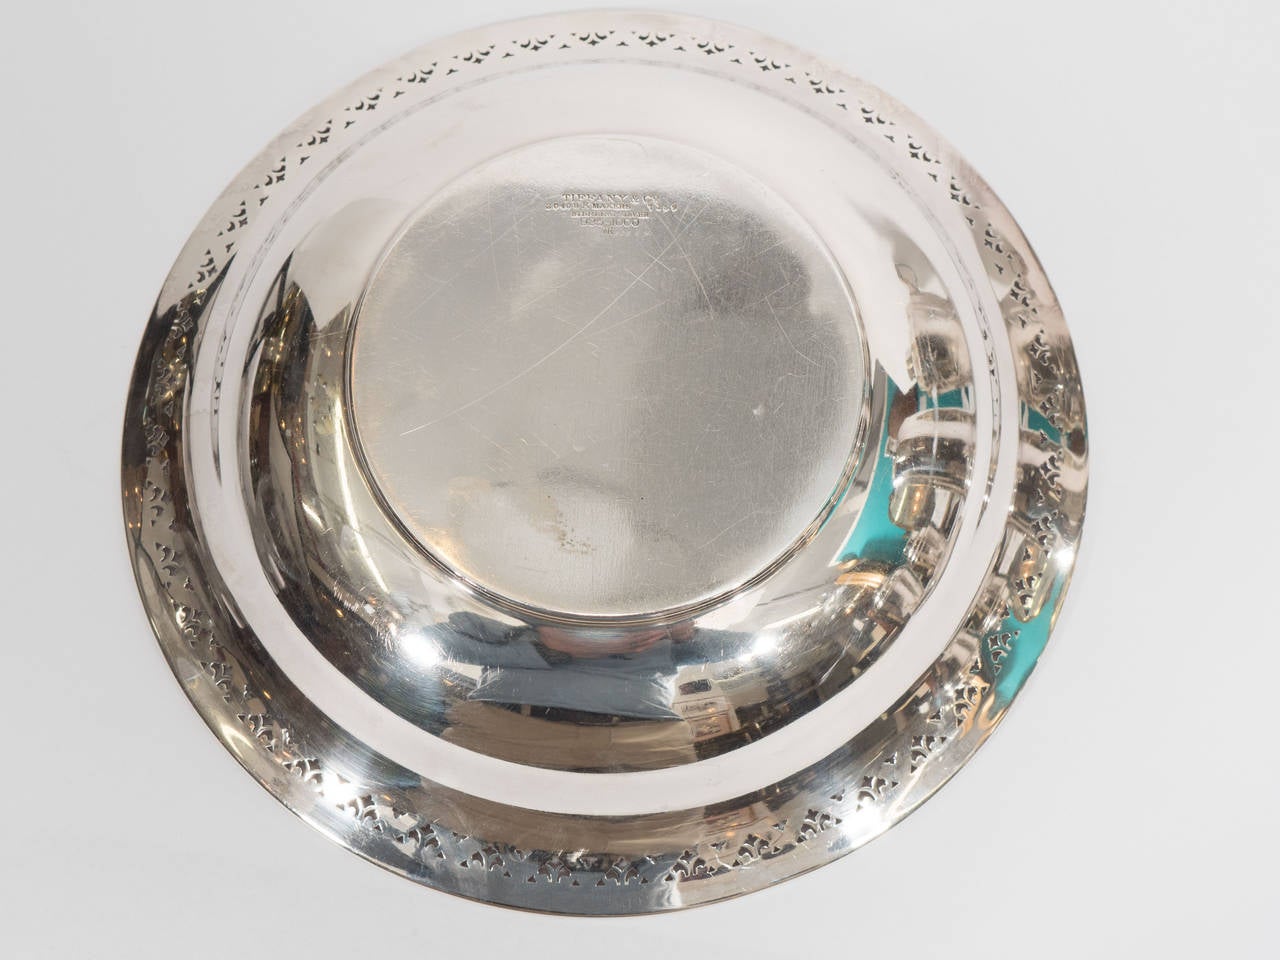 Antique Tiffany & Co. Sterling Silver Pierced Edge Bowl For Sale 2